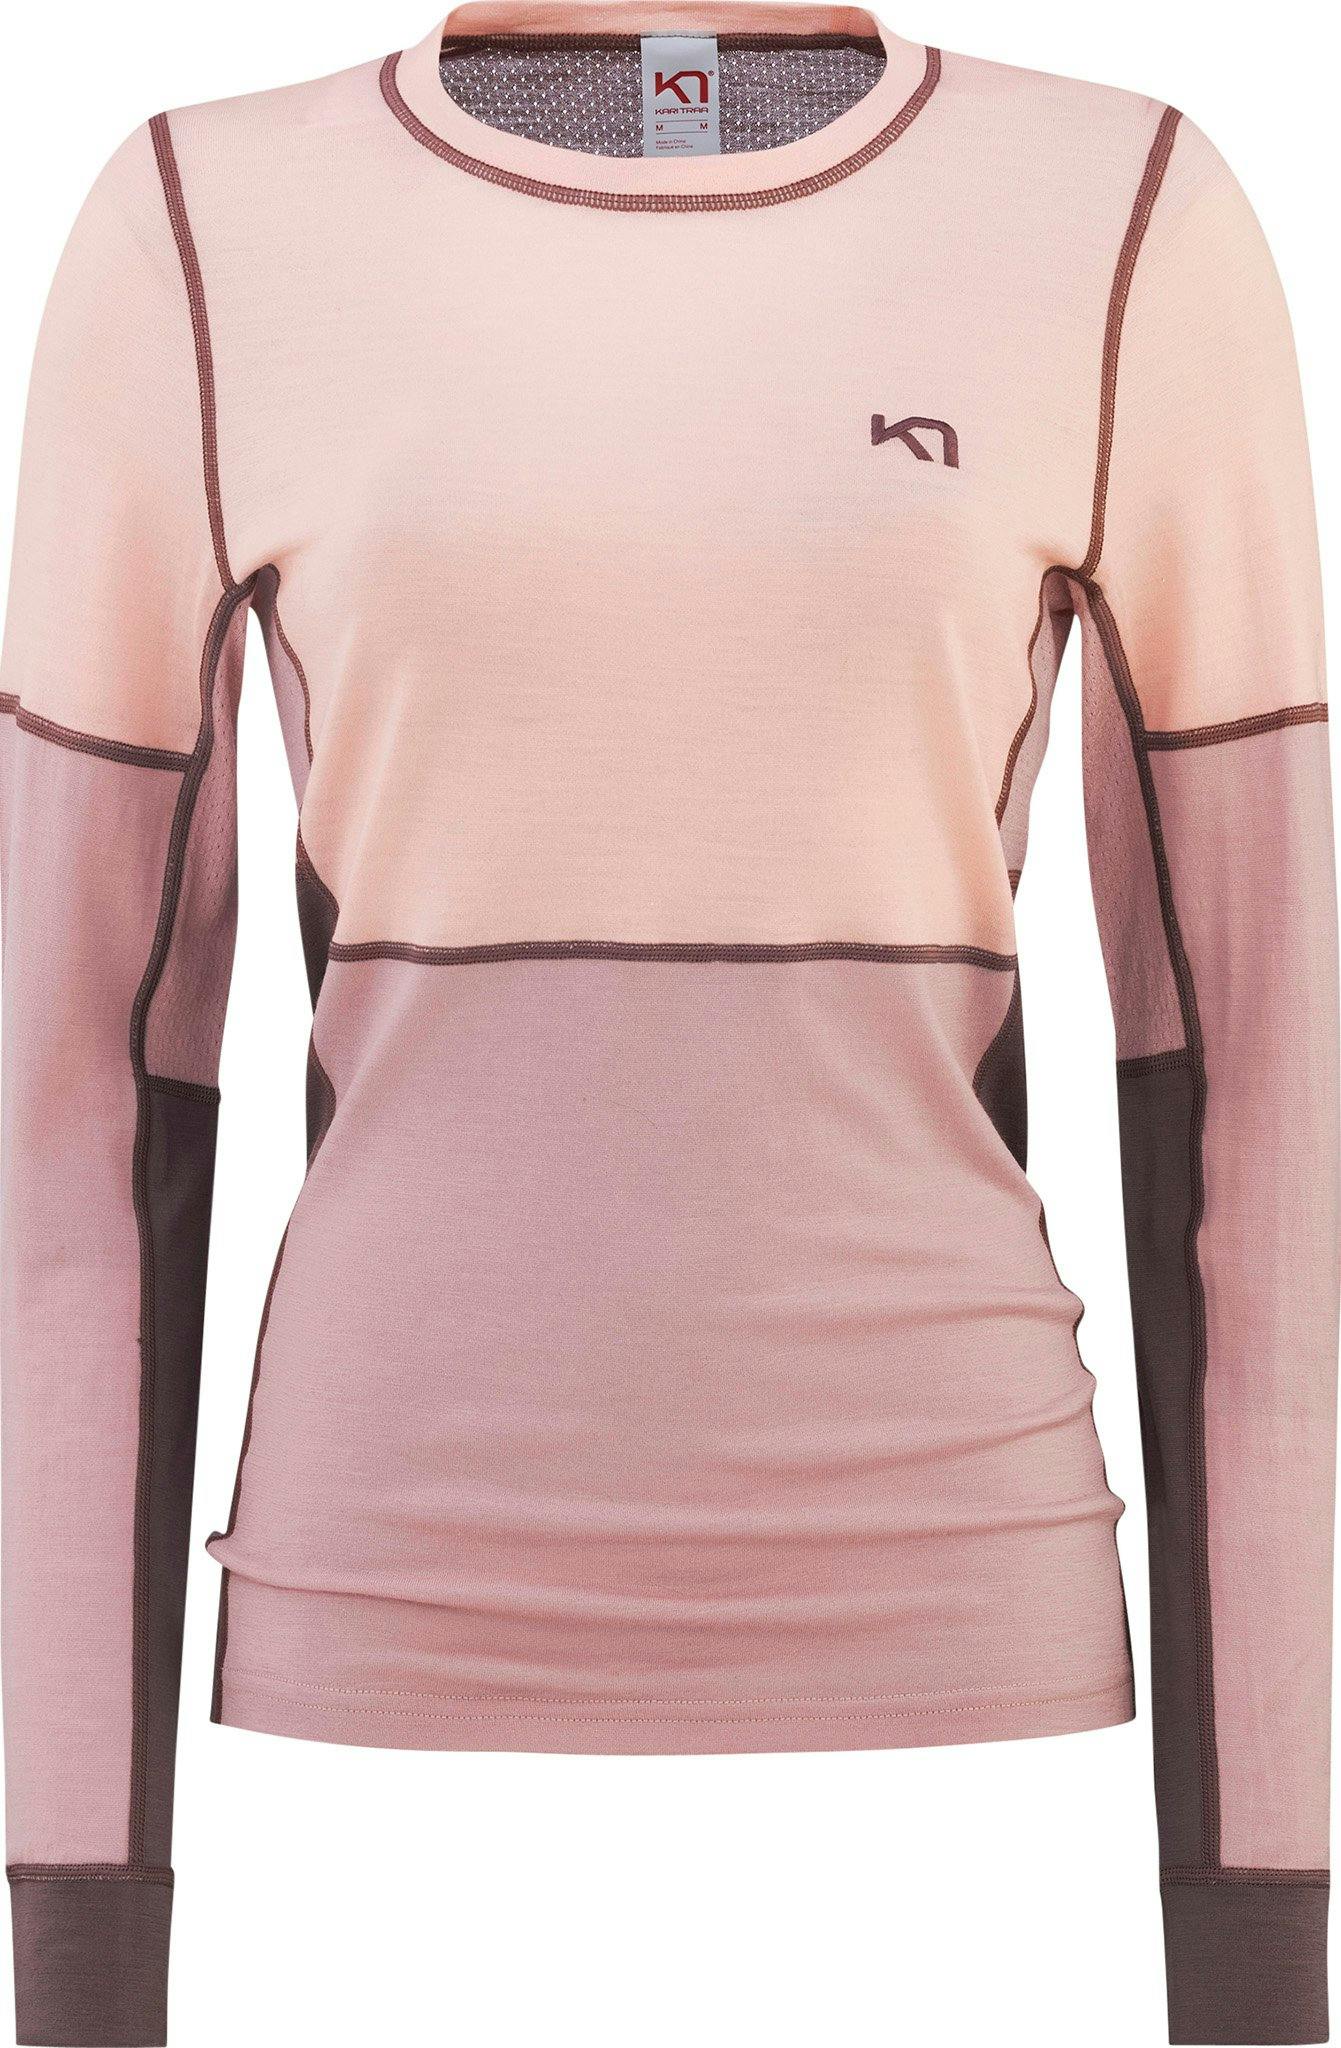 Product image for Lam Long Sleeve Baselayer - Women's